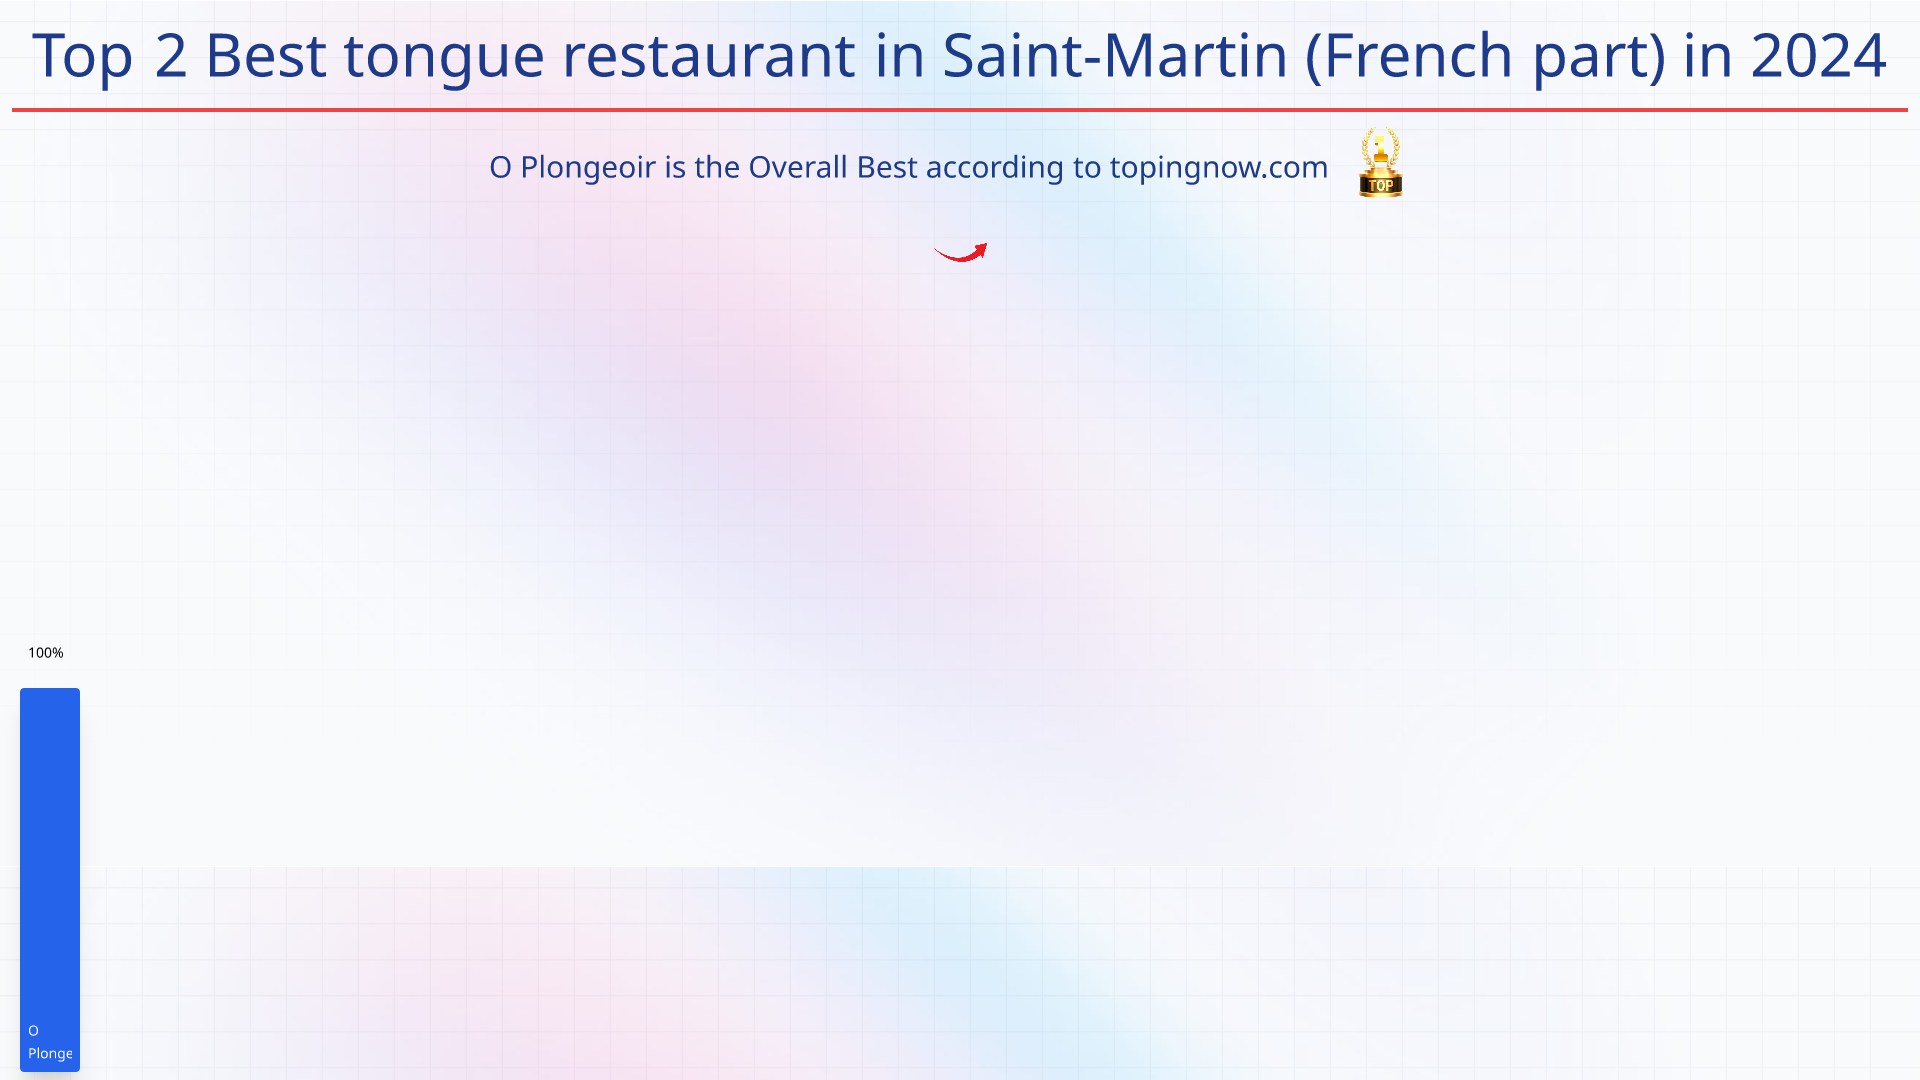 Top 2 Best tongue restaurant in Saint-Martin (French part) in 2024: Top 2 Best tongue restaurant in Saint-Martin (French part) in 2024